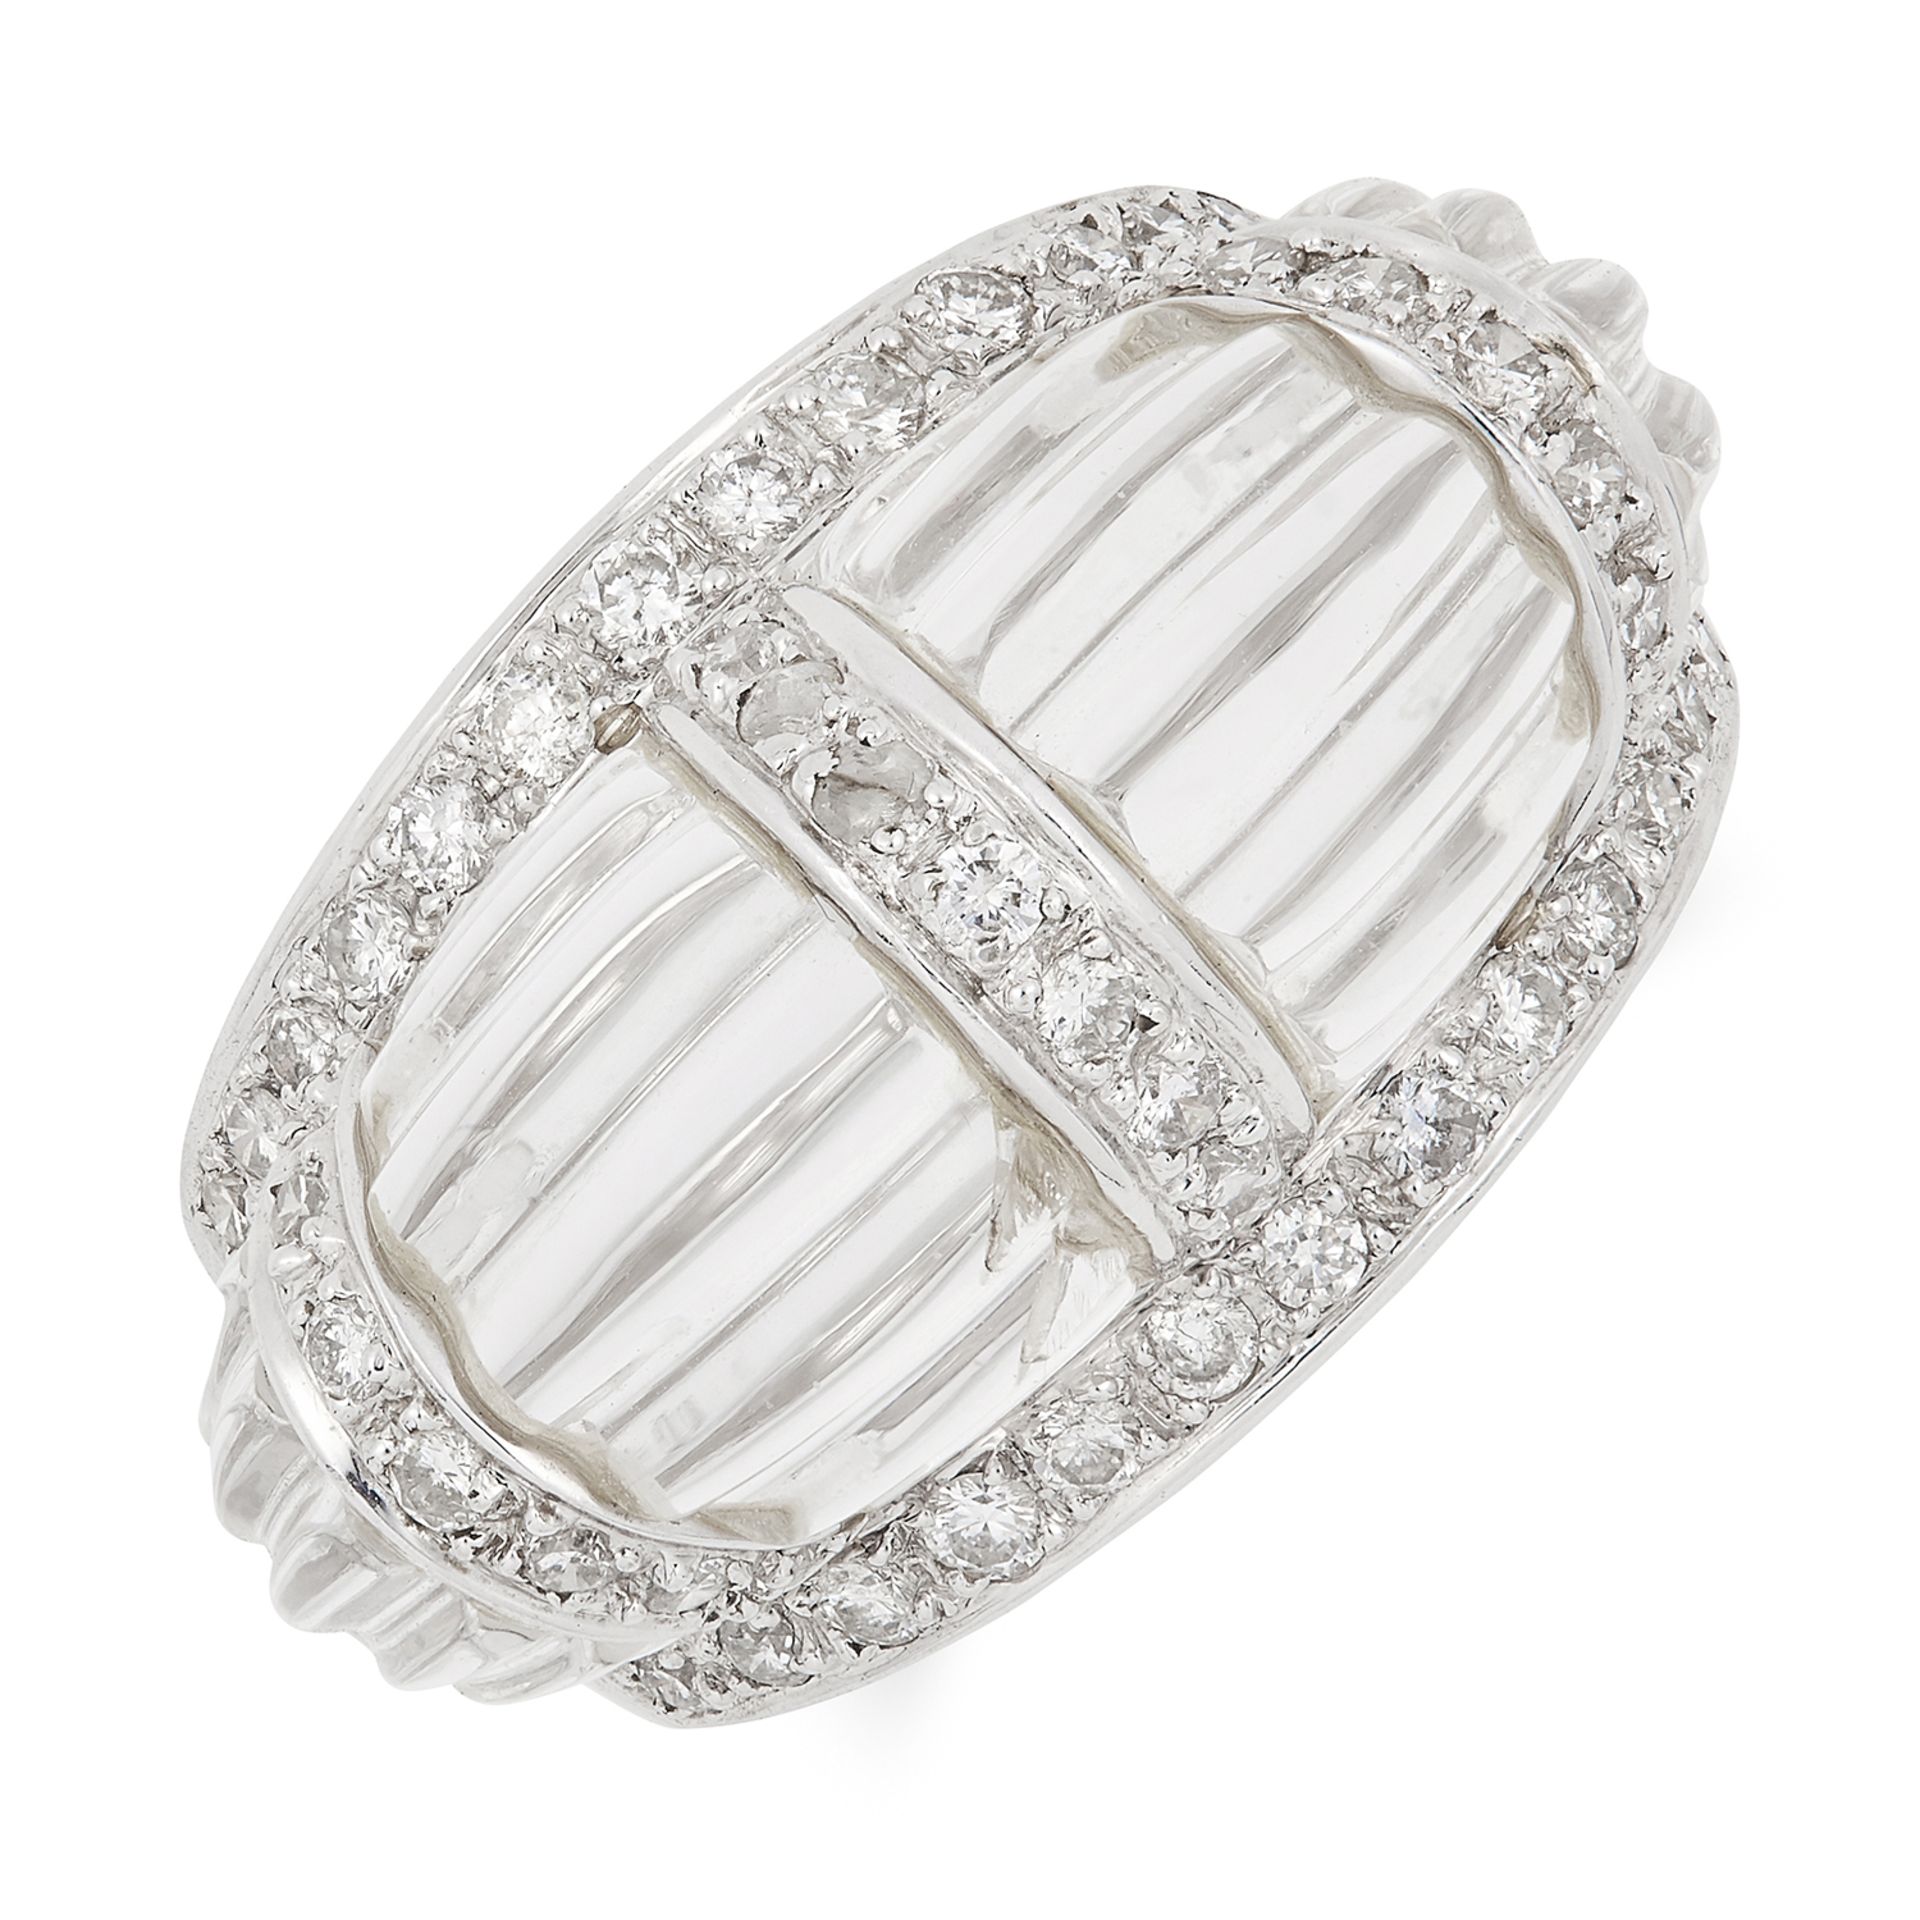 A CARVED ROCK CRYSTAL AND DIAMOND BOMBE RING set with alternating carved rock crystal and round